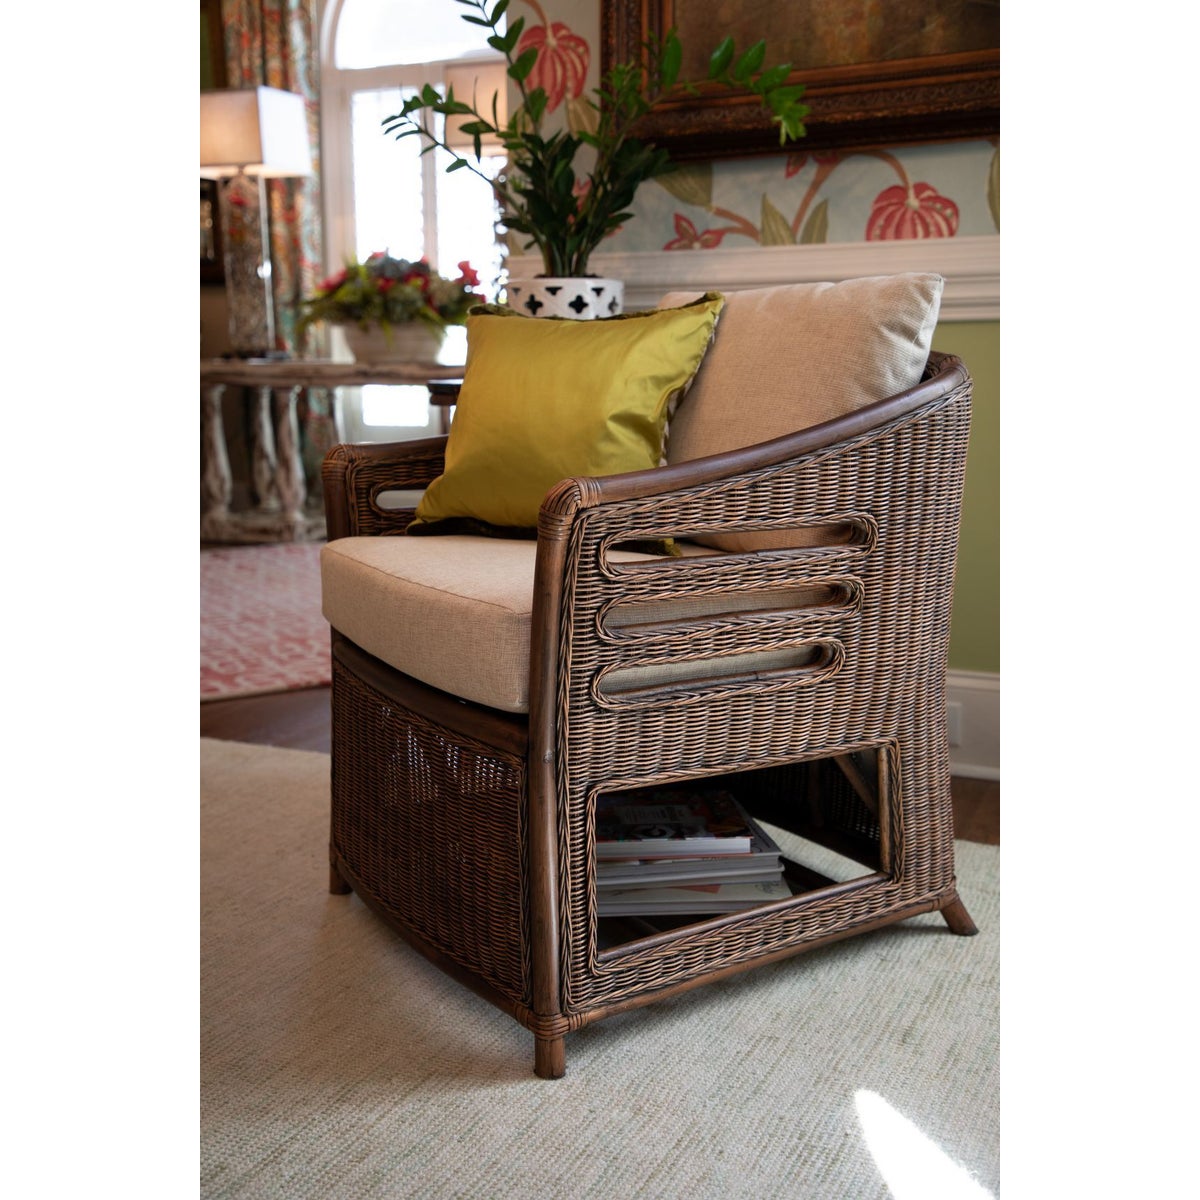 CLOSE-OUT!!Captains Chair Frame Color - Ginger Cushion Color - Cream Jarrett Bay Collection 5